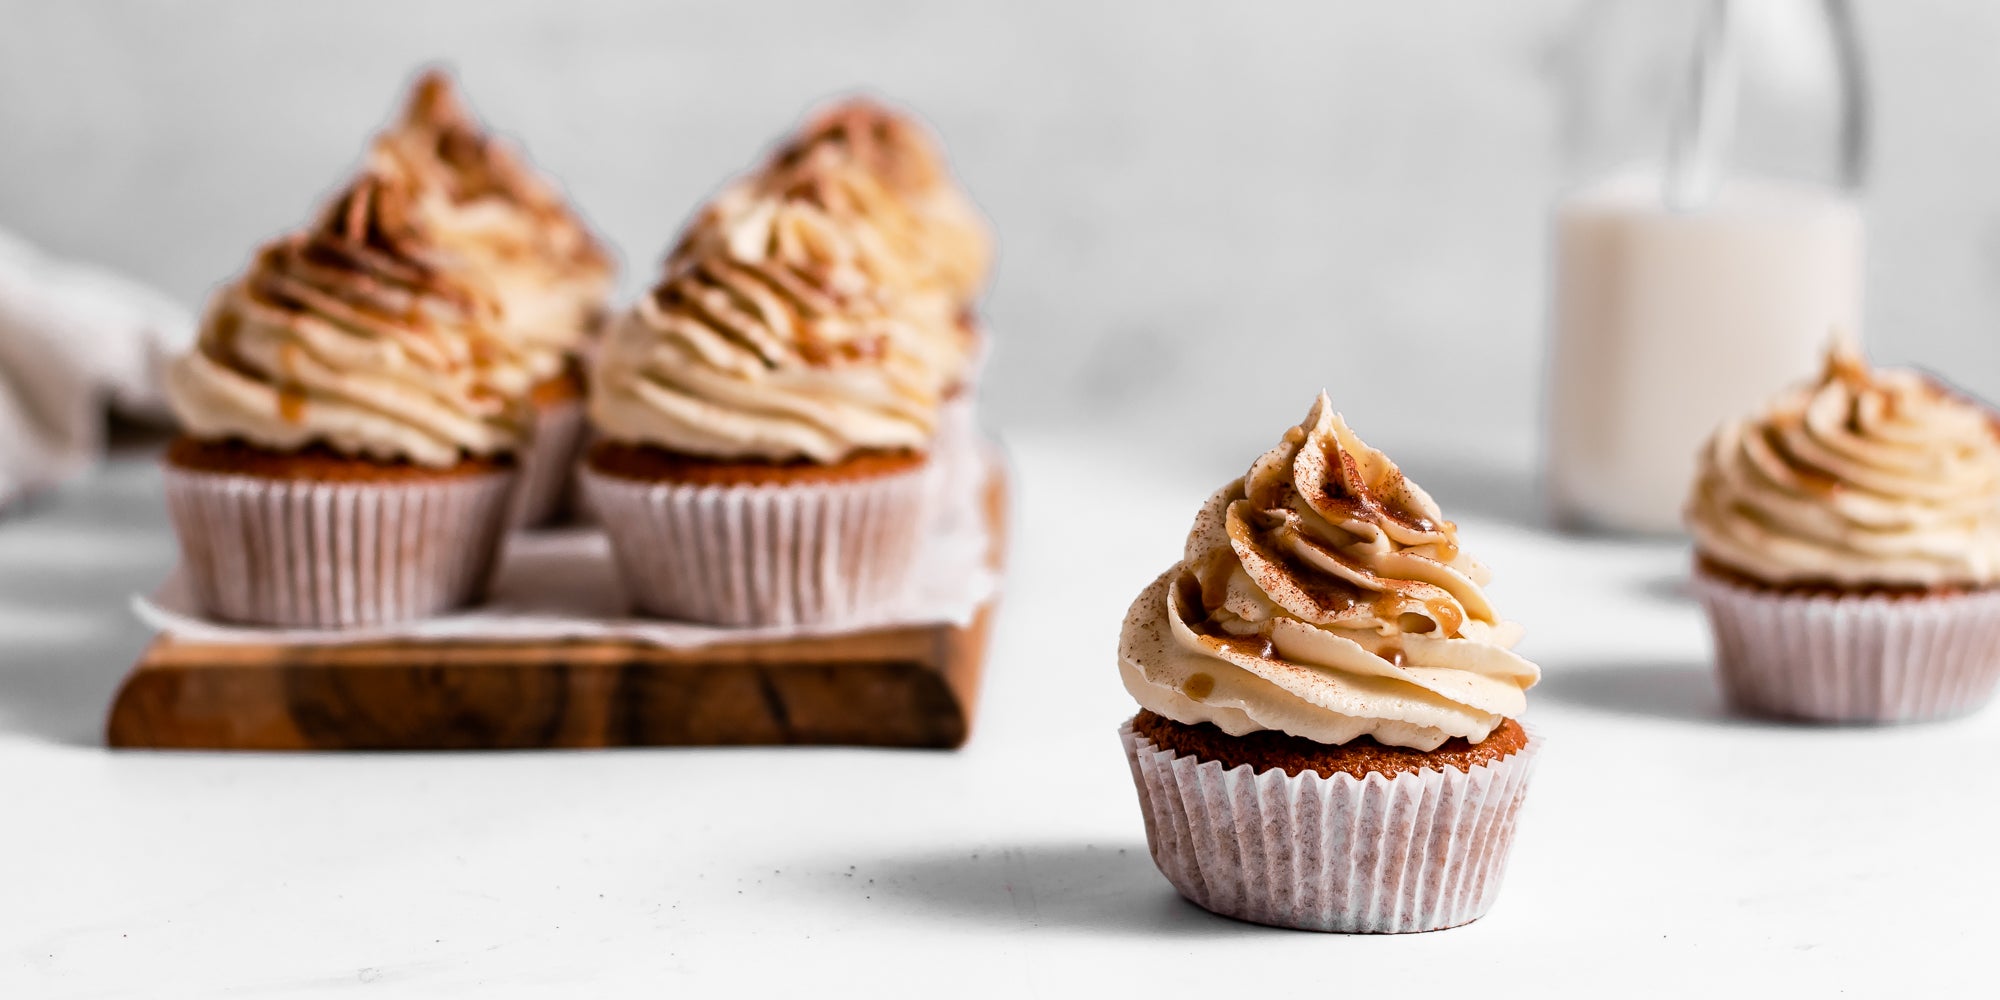 Single Gingerbread Cinnamon Cupcake decorated with buttercream drizzled with caramel sauce